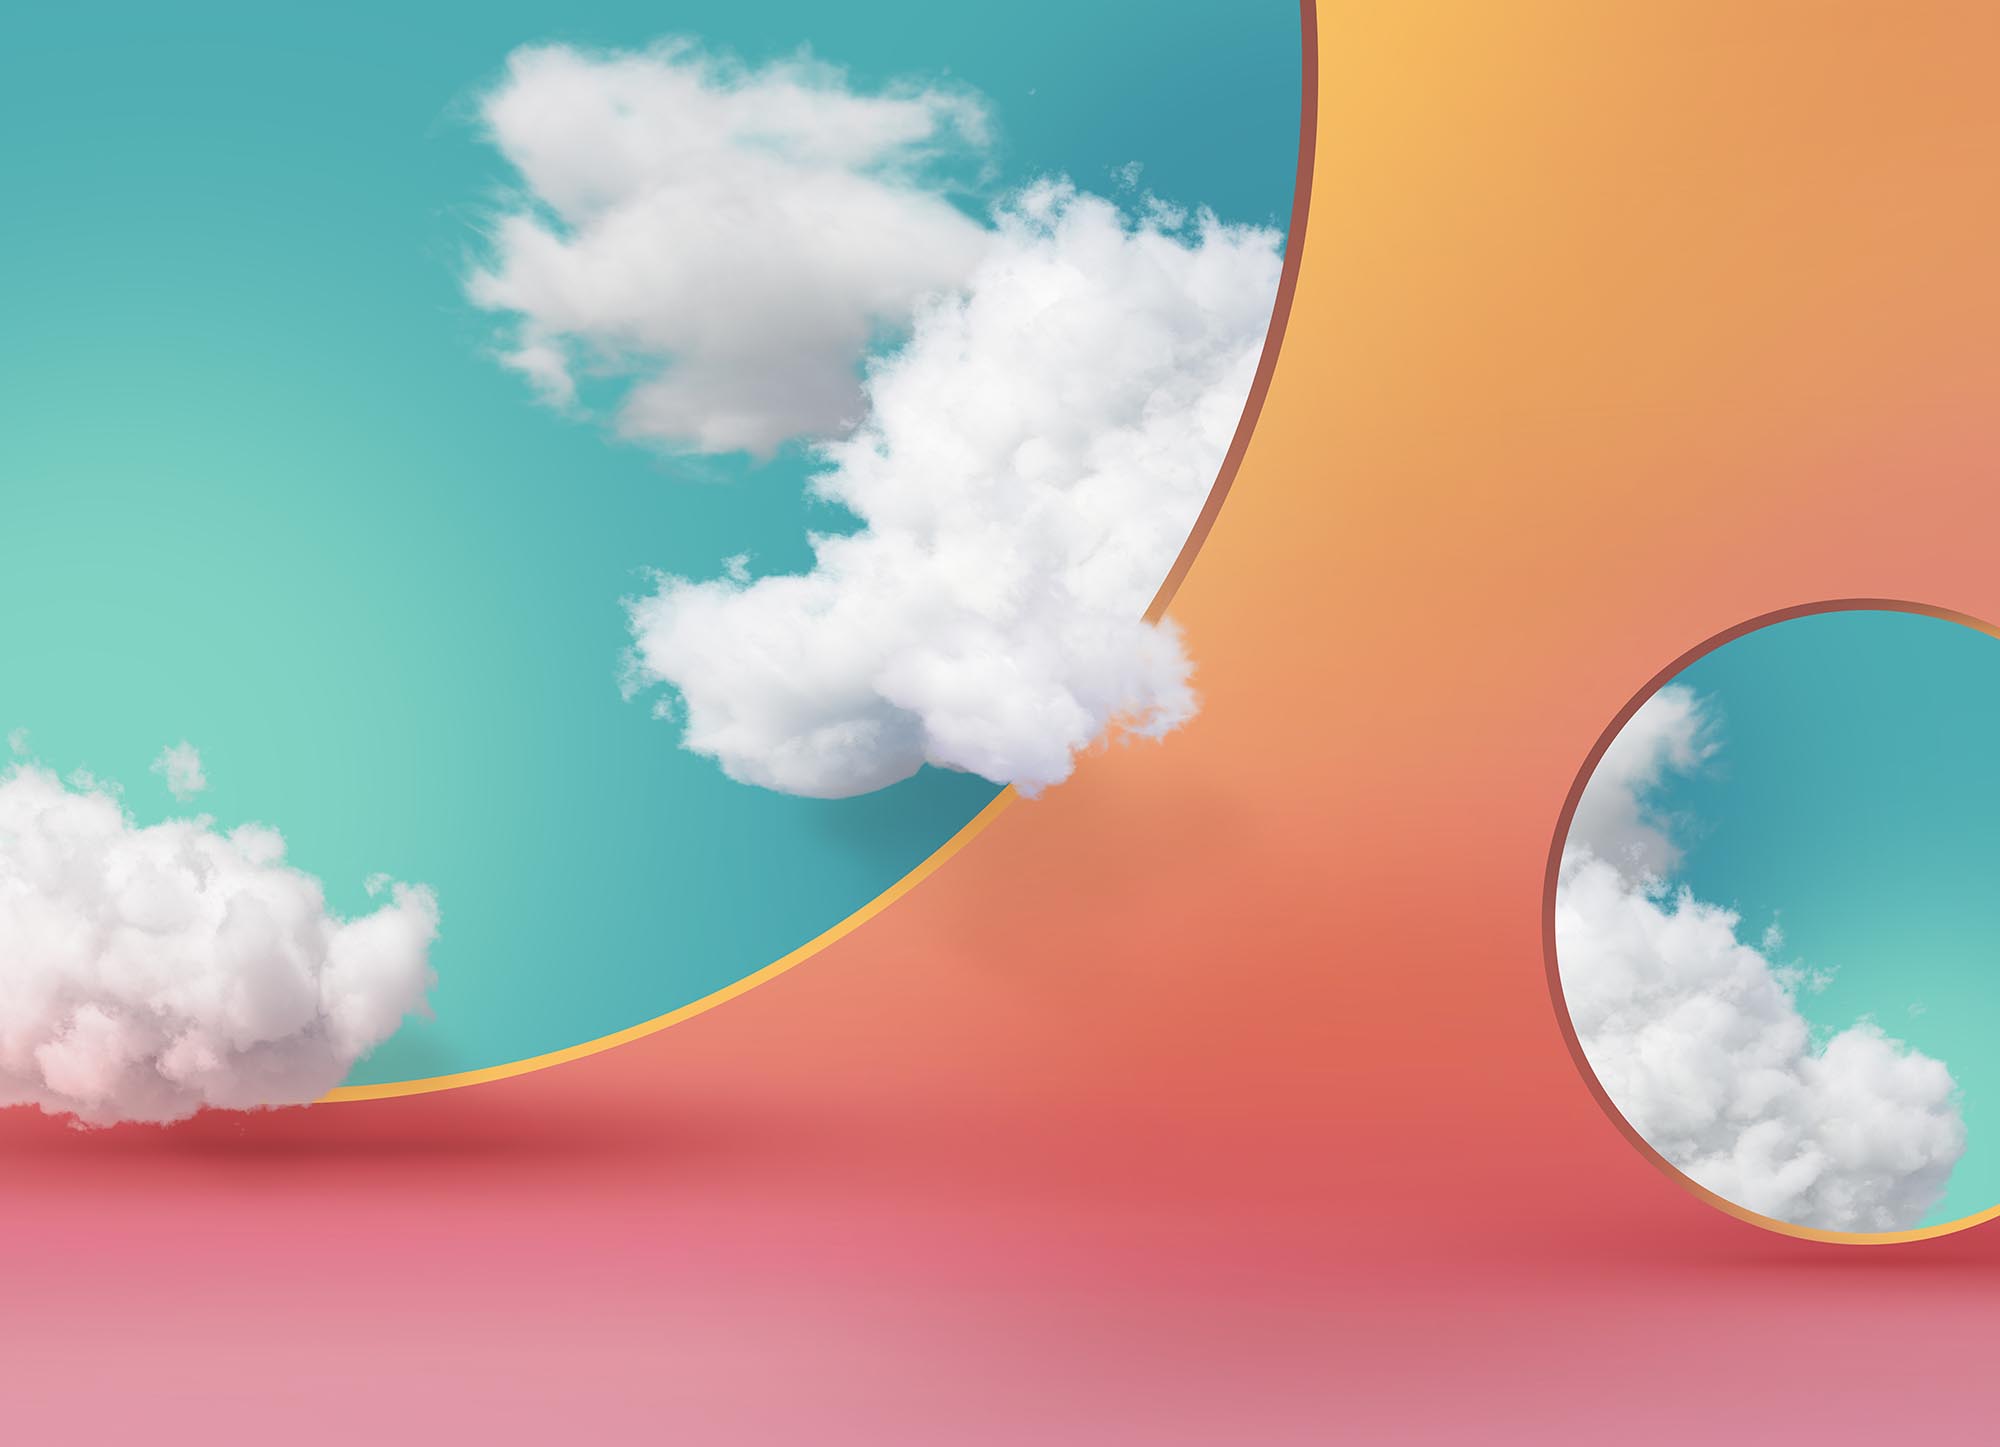 abstract peachy background with white clouds on the blue sky inside the two round holes, optical illusion